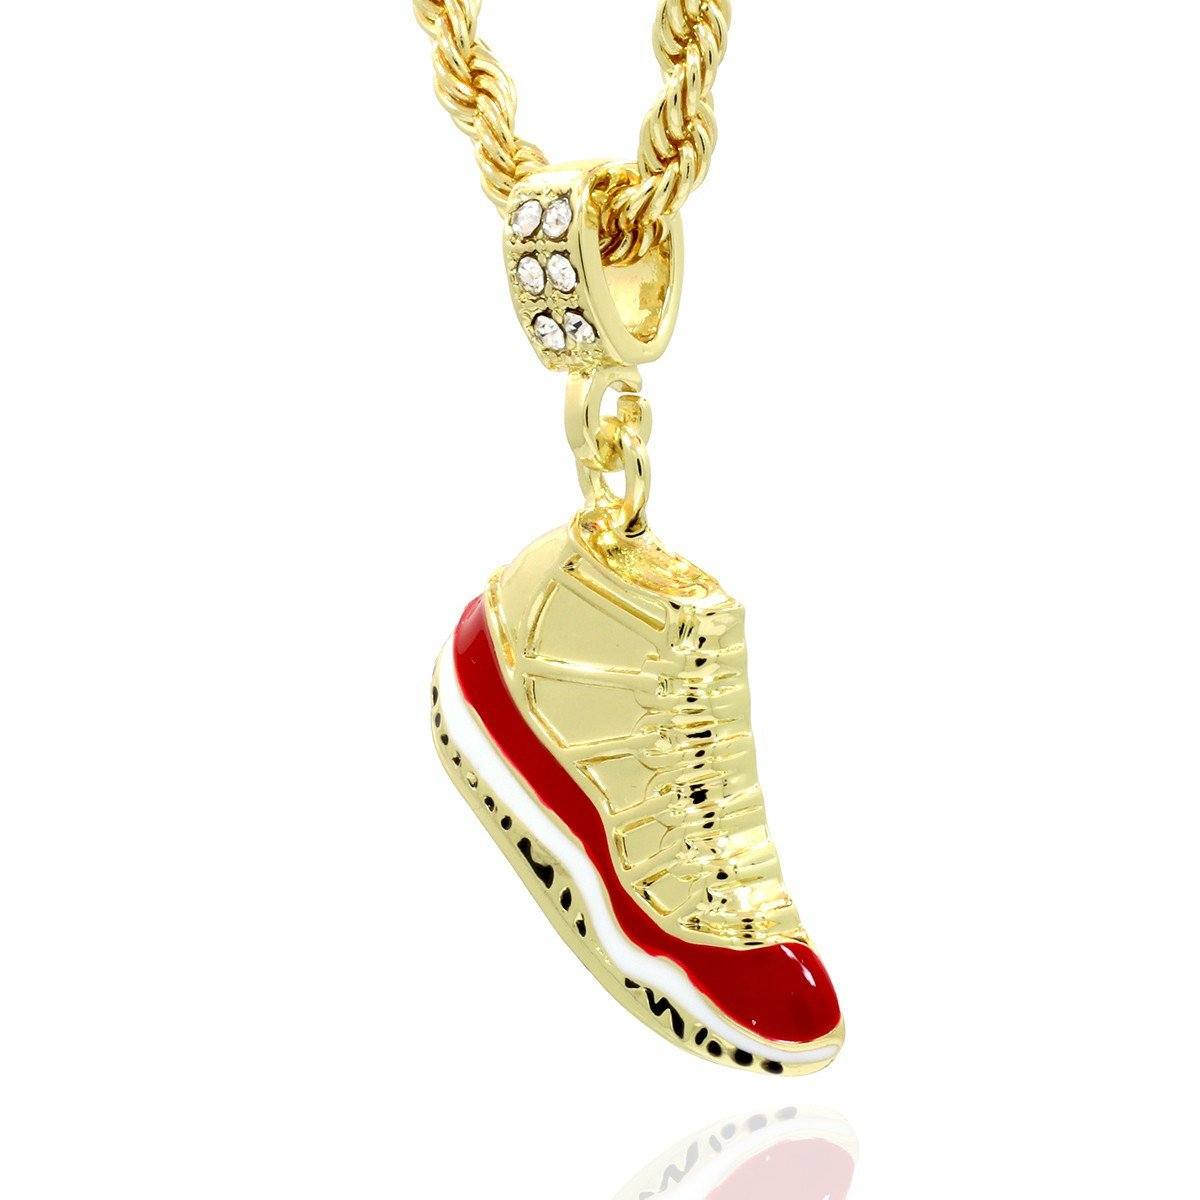 14K GOLD PLATED RETRO 11 "CHERRY" PENDANT WITH GOLD ROPE CHAIN